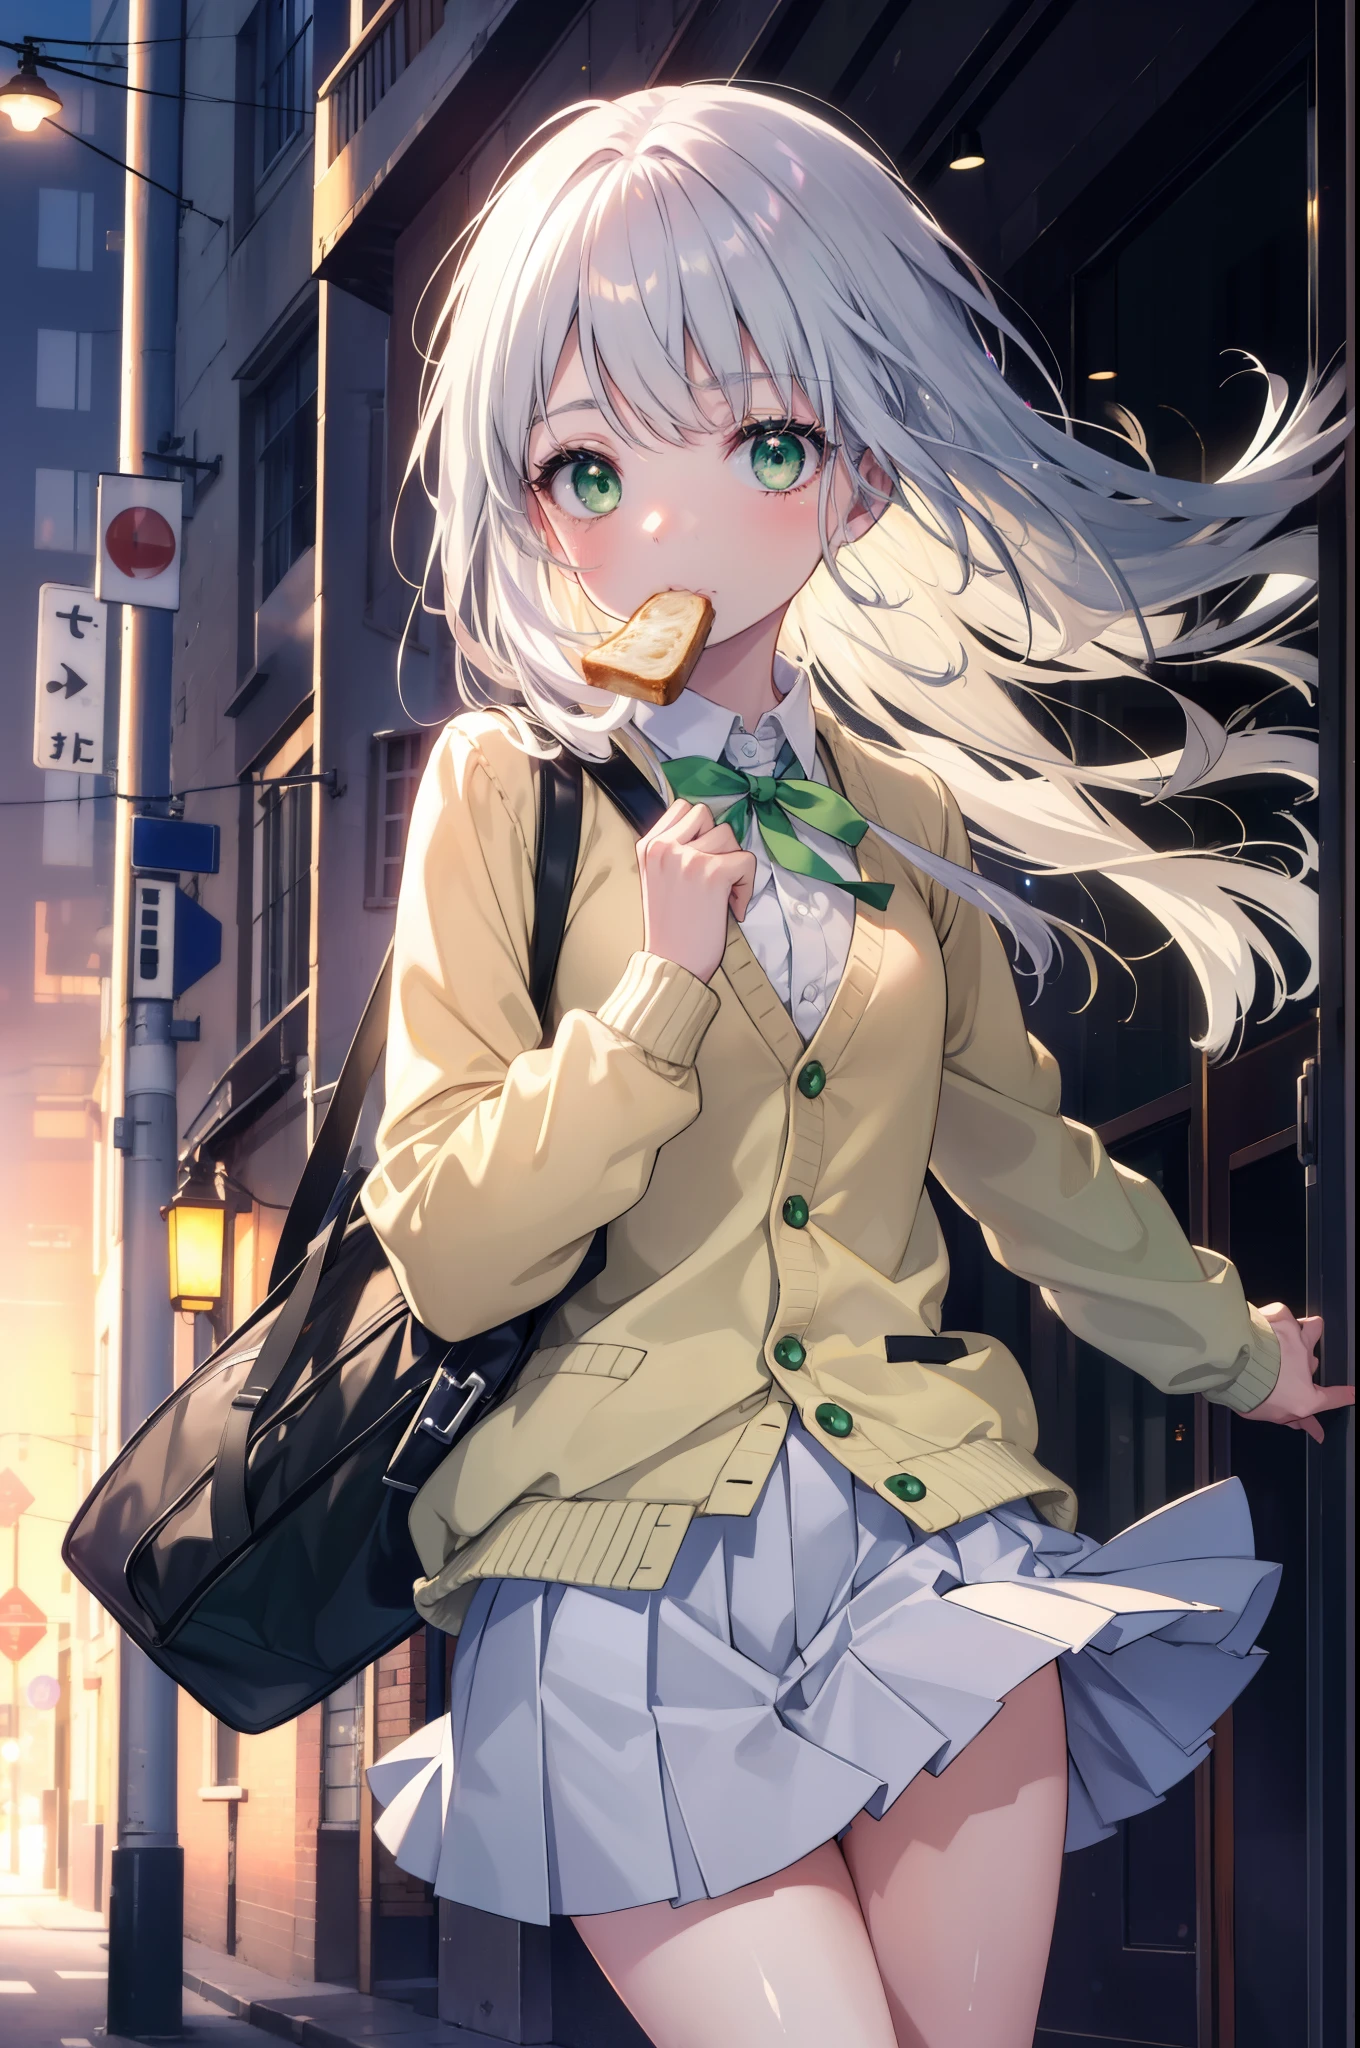 index, index, (green eyes:1.5), silver hair, long hair, (flat chest:1.2),yMedium sleeve shirt,ribbon,Yellow cardigan,blazer,black pleated skirt,white pantyhose,loafers,toast in your mouth, running, city street,morning,morning日,sunrise,A girl running with a student bag,
break looking at viewer, Upper body, ぜん
break outdoors, In town,
break (masterpiece:1.2), highest quality, High resolution, unity 8k wallpaper, (figure:0.8), (detailed and beautiful eyes:1.6), highly detailed face, perfect lighting, Very detailed CG, (perfect hands, perfect anatomy),